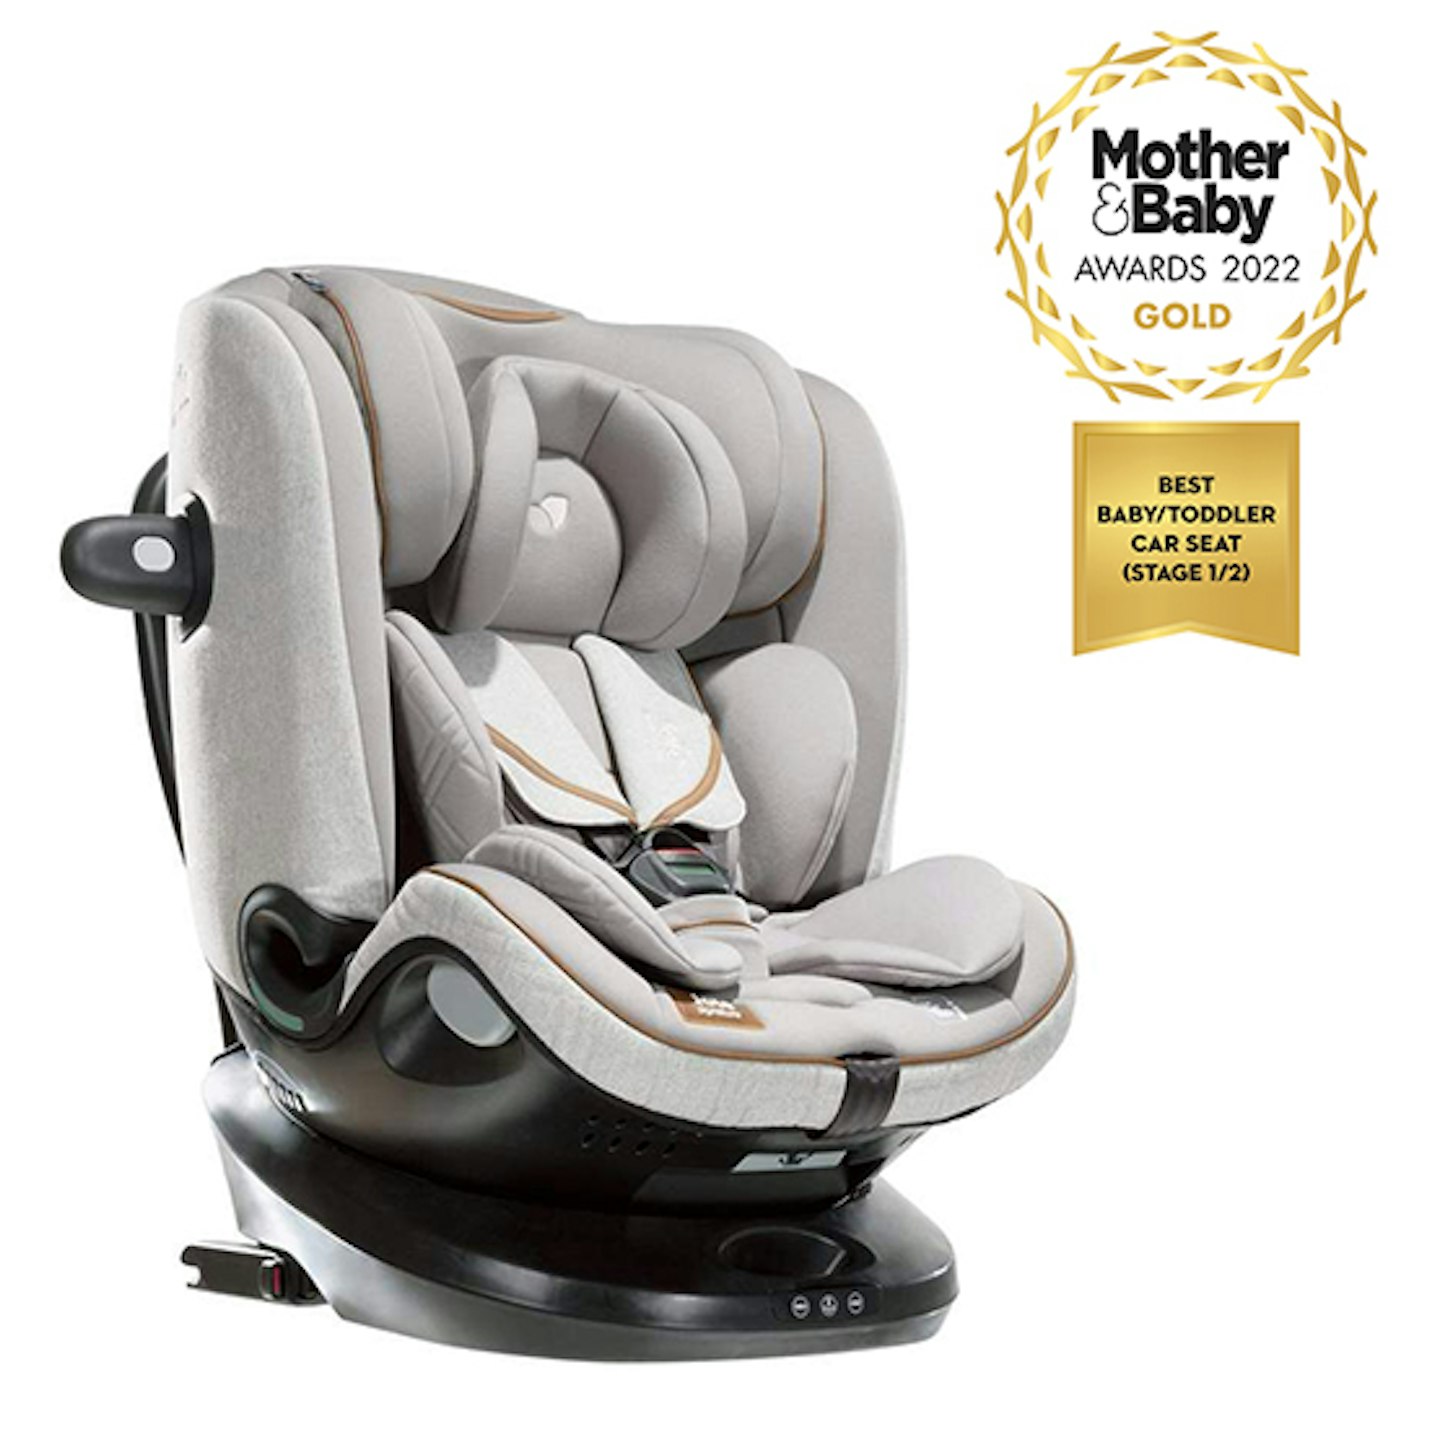 Review: Joie Spin 360 Group 0+1 Car Seat 